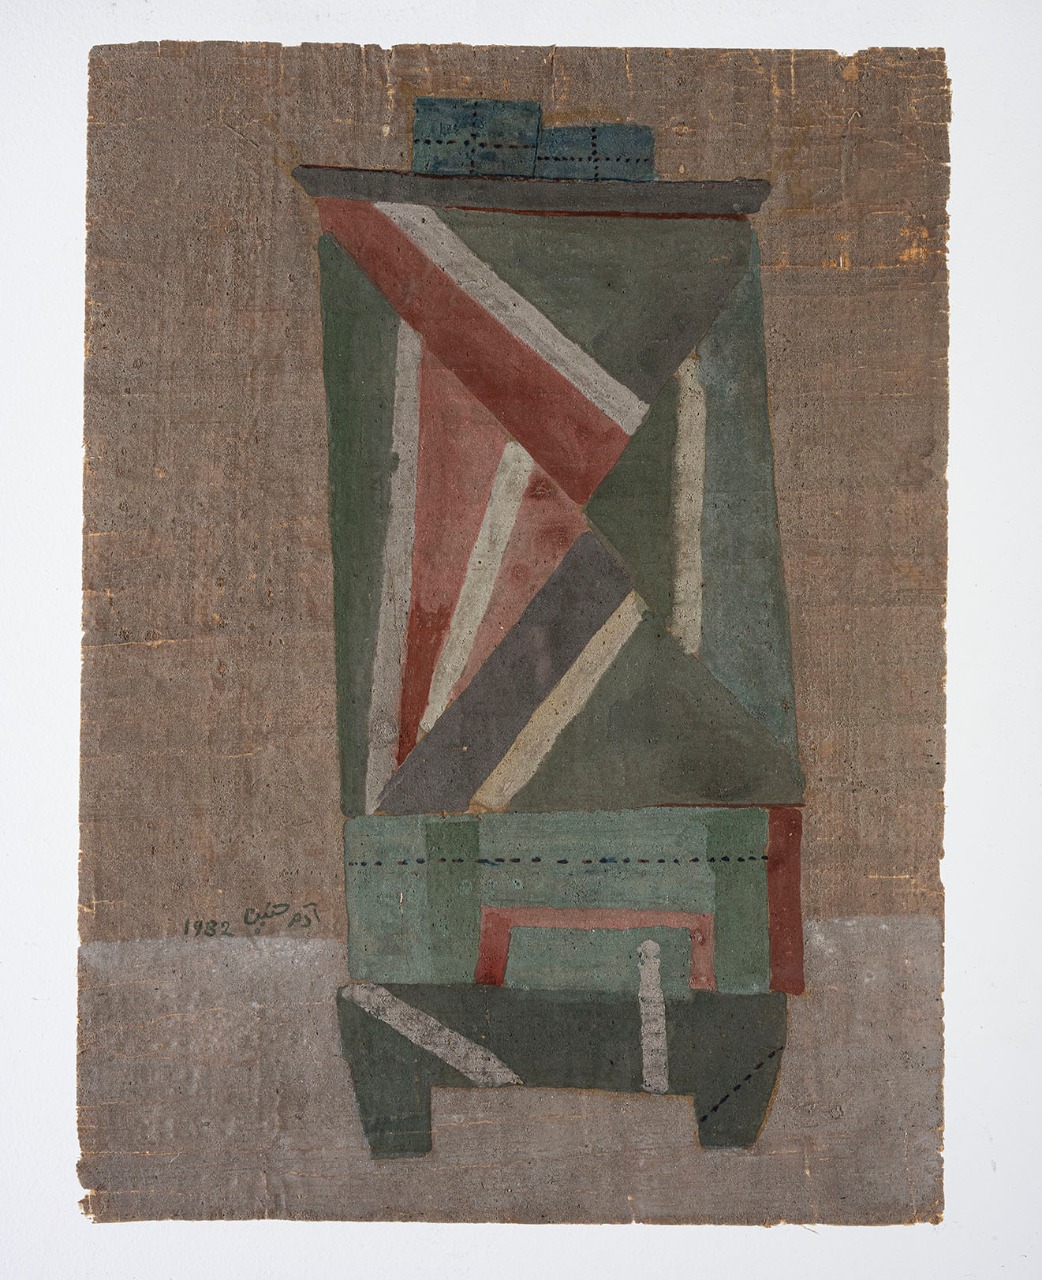 Adam Henein (1925–2021)  37.5 x 27.5 cm Mixed media on paper Signed in Arabic and dated 1982  MG-226-RB